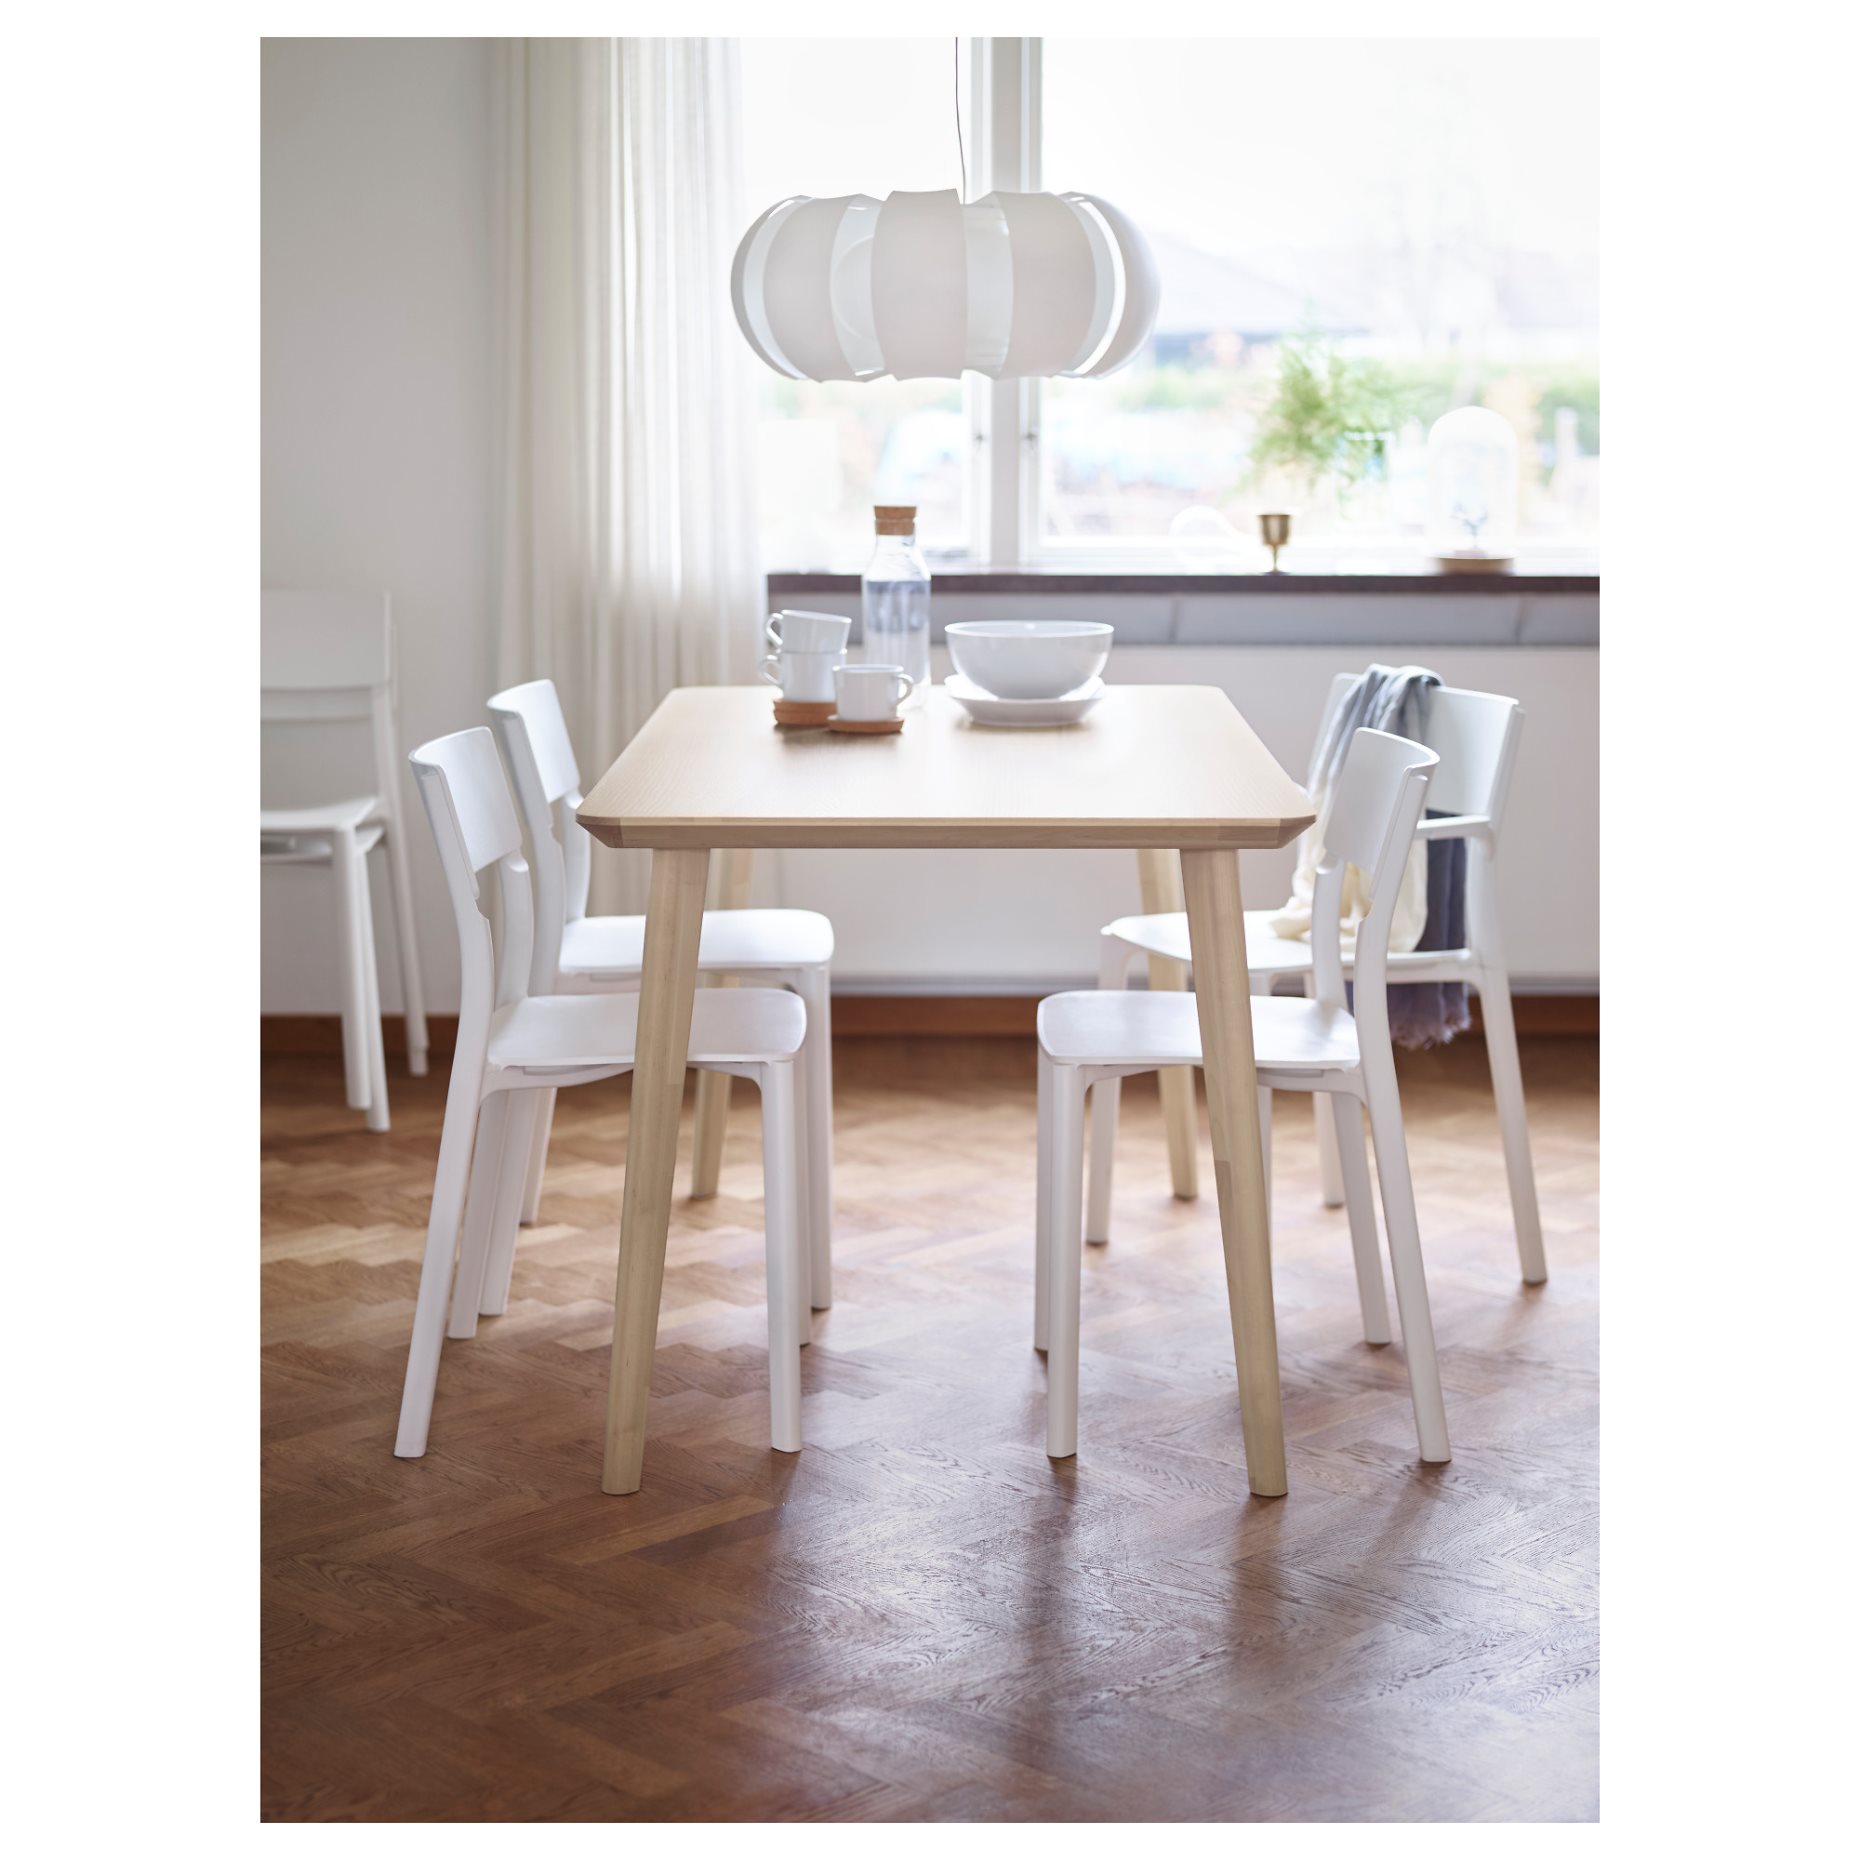 LISABO/JANINGE, table and 4 chairs, 491.032.47